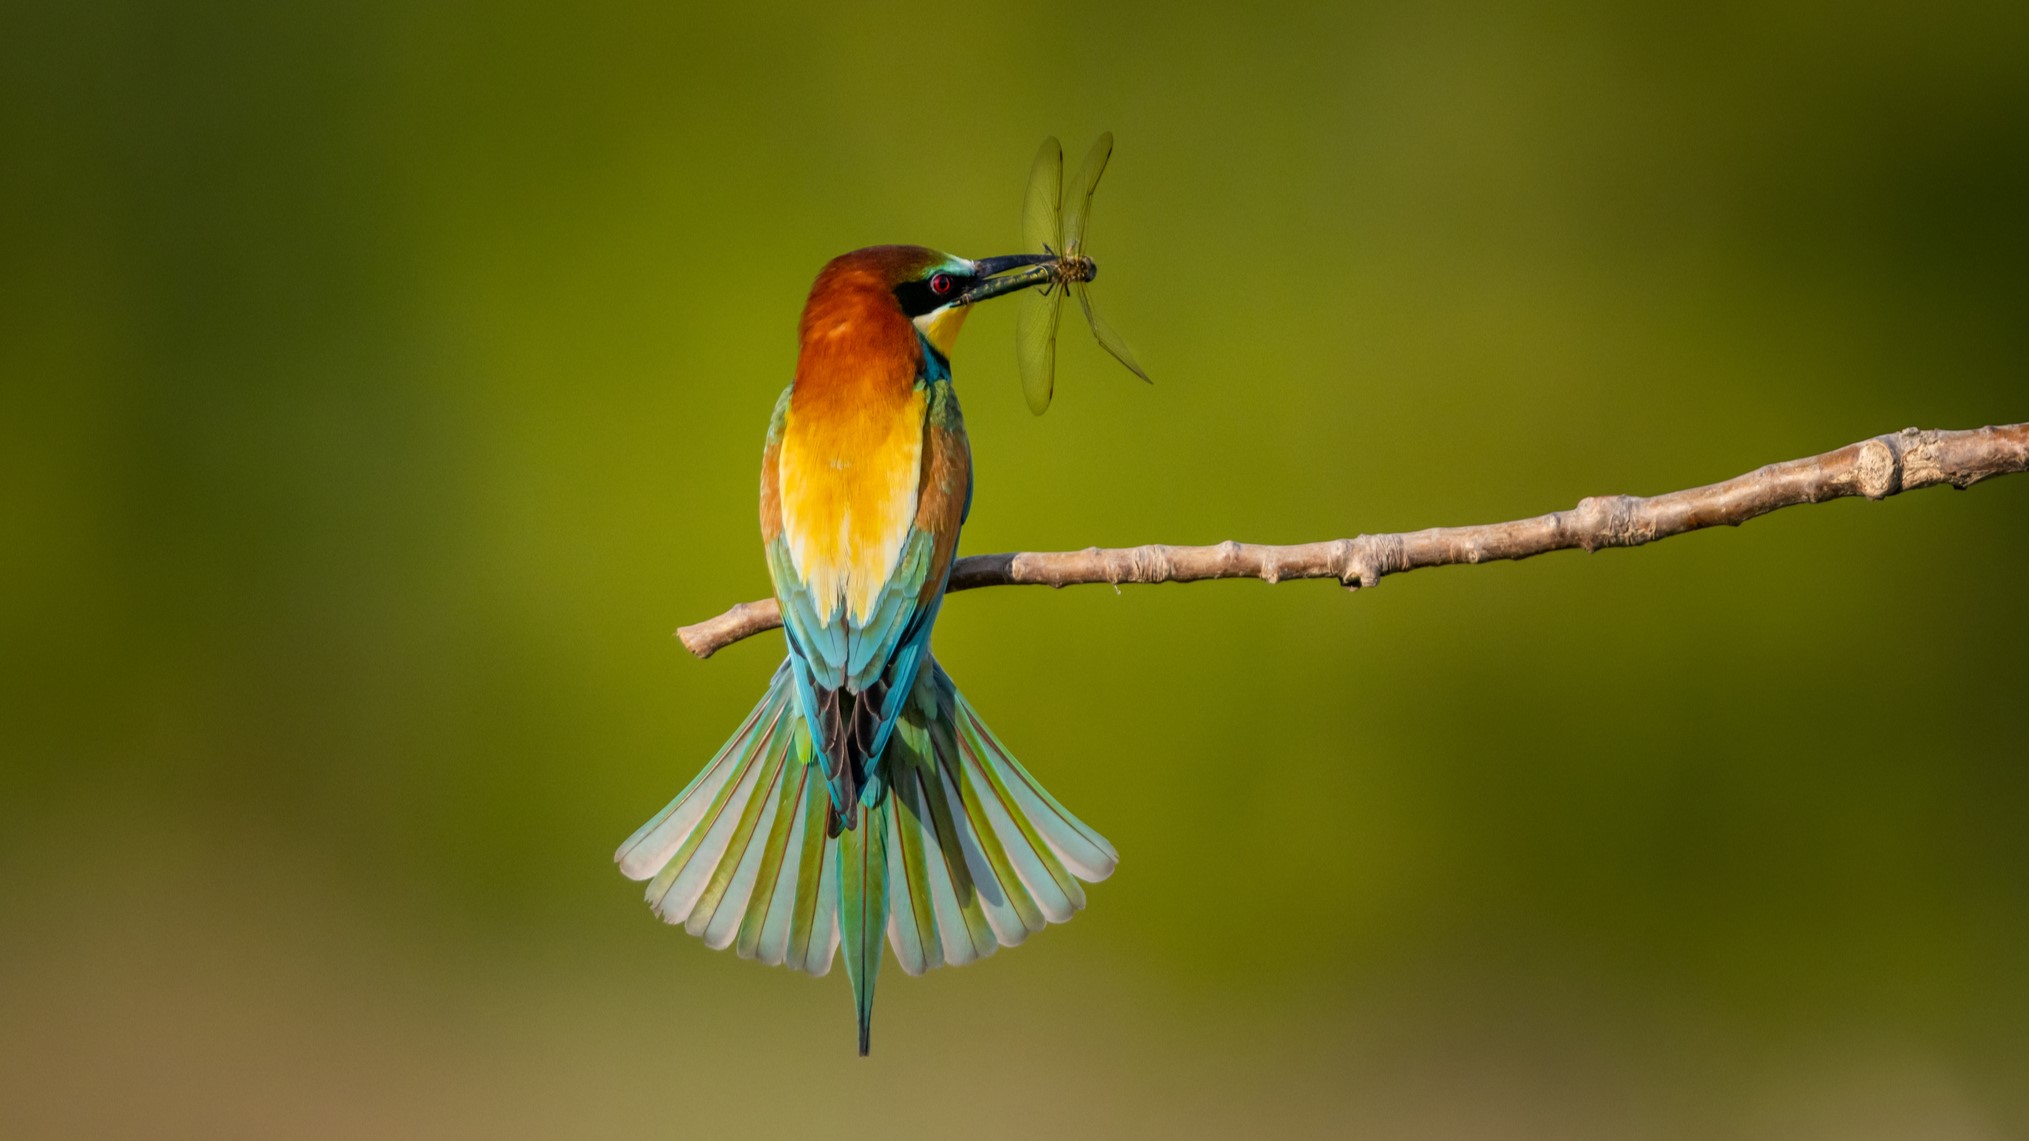 A European bee-eater sitting on a branch with a dragonfly in its beak.